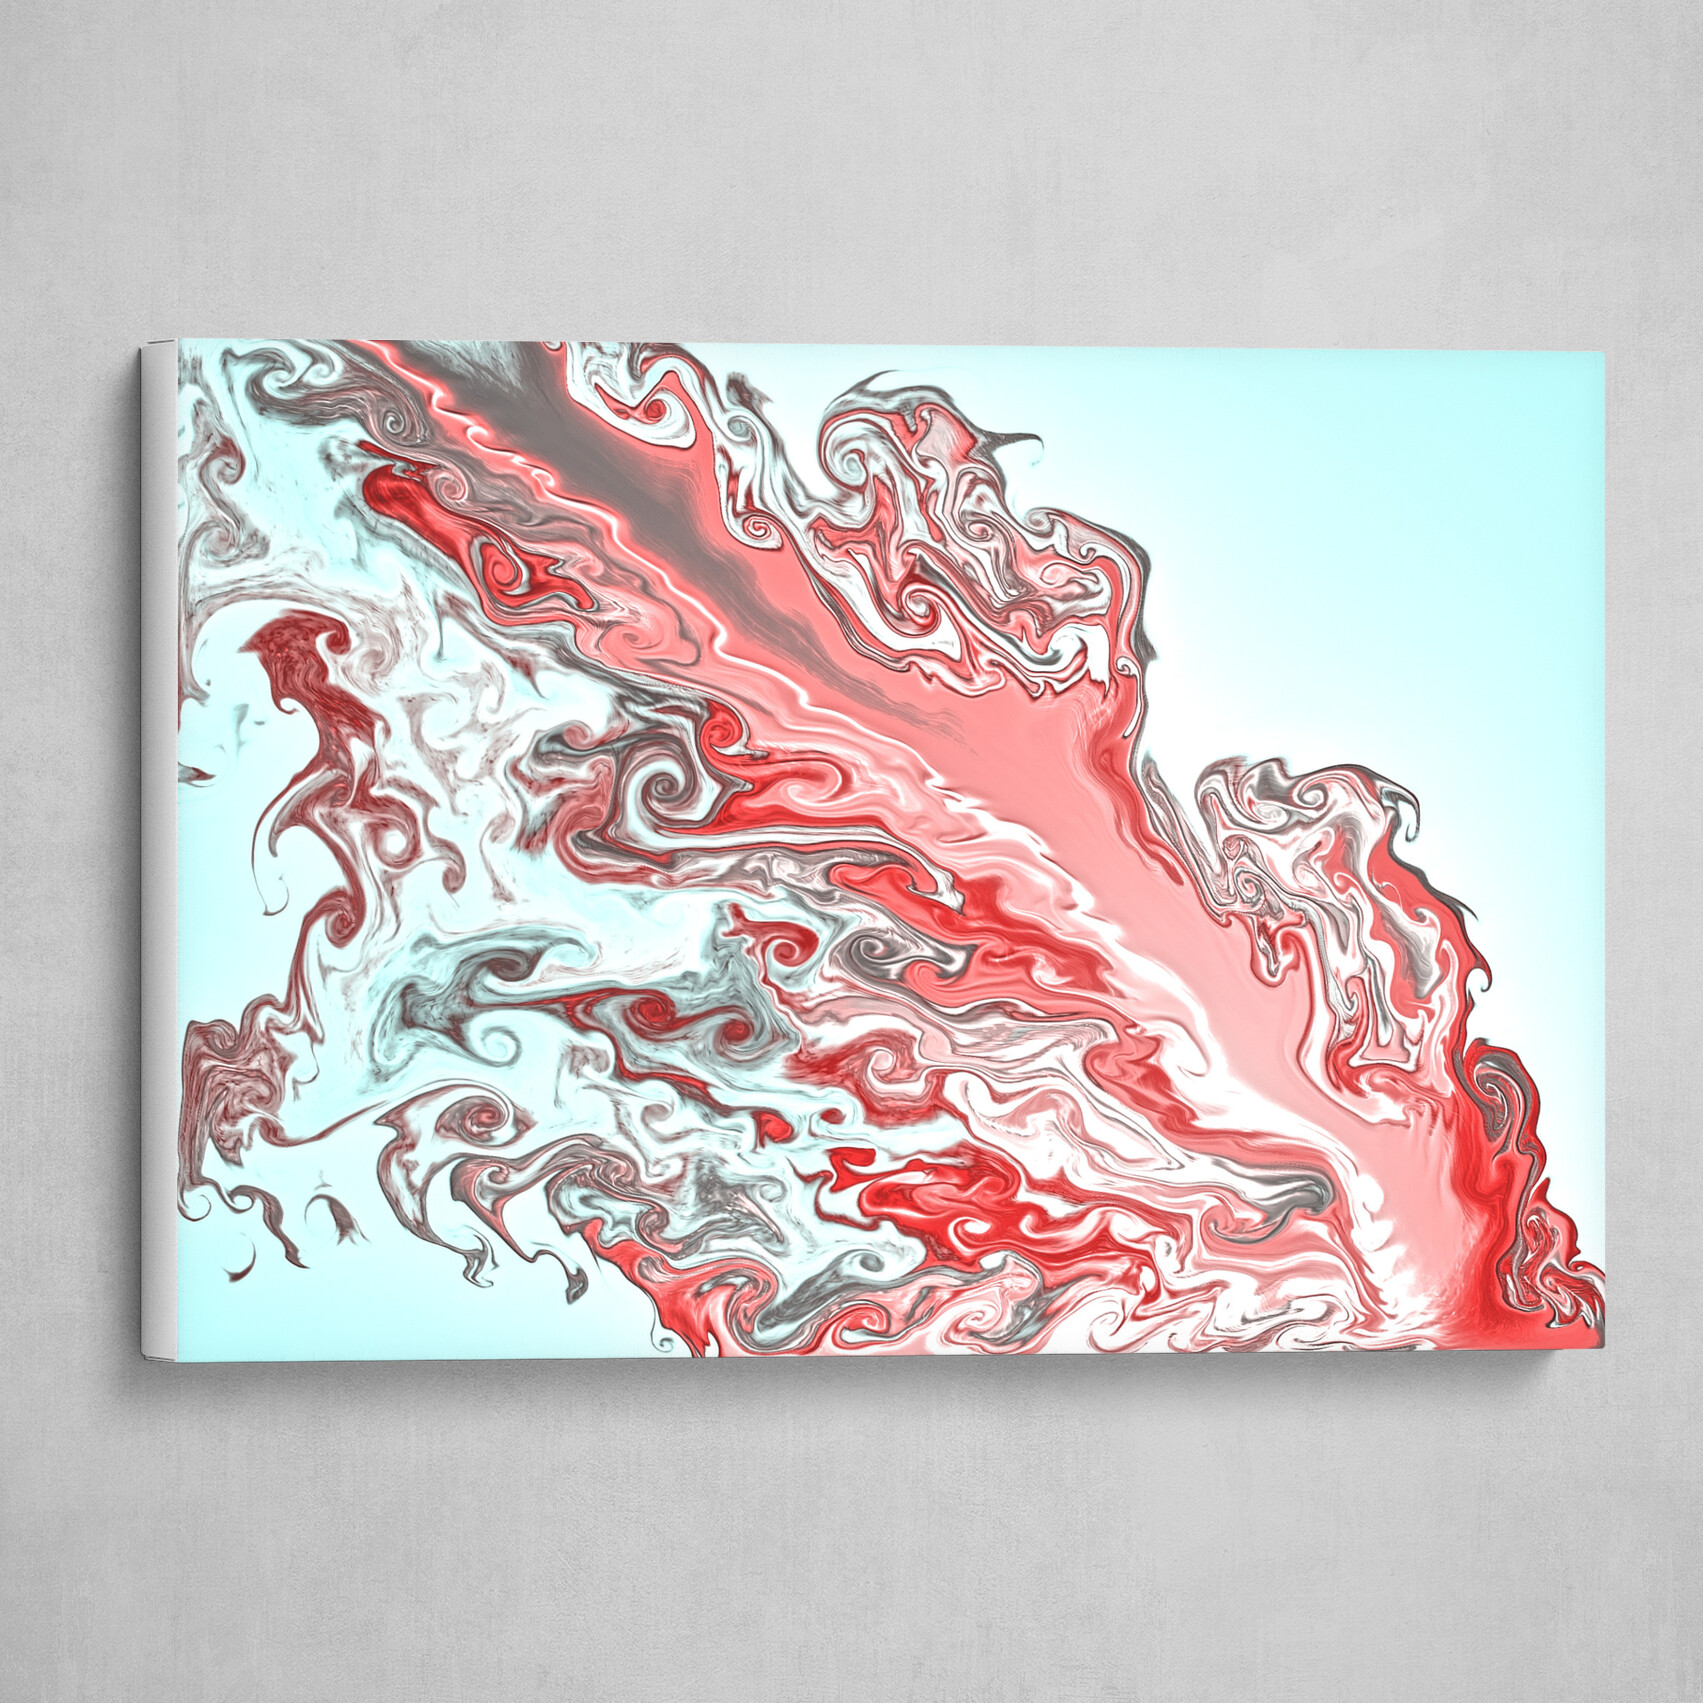 Red Blue and Silver fluid abstract 2